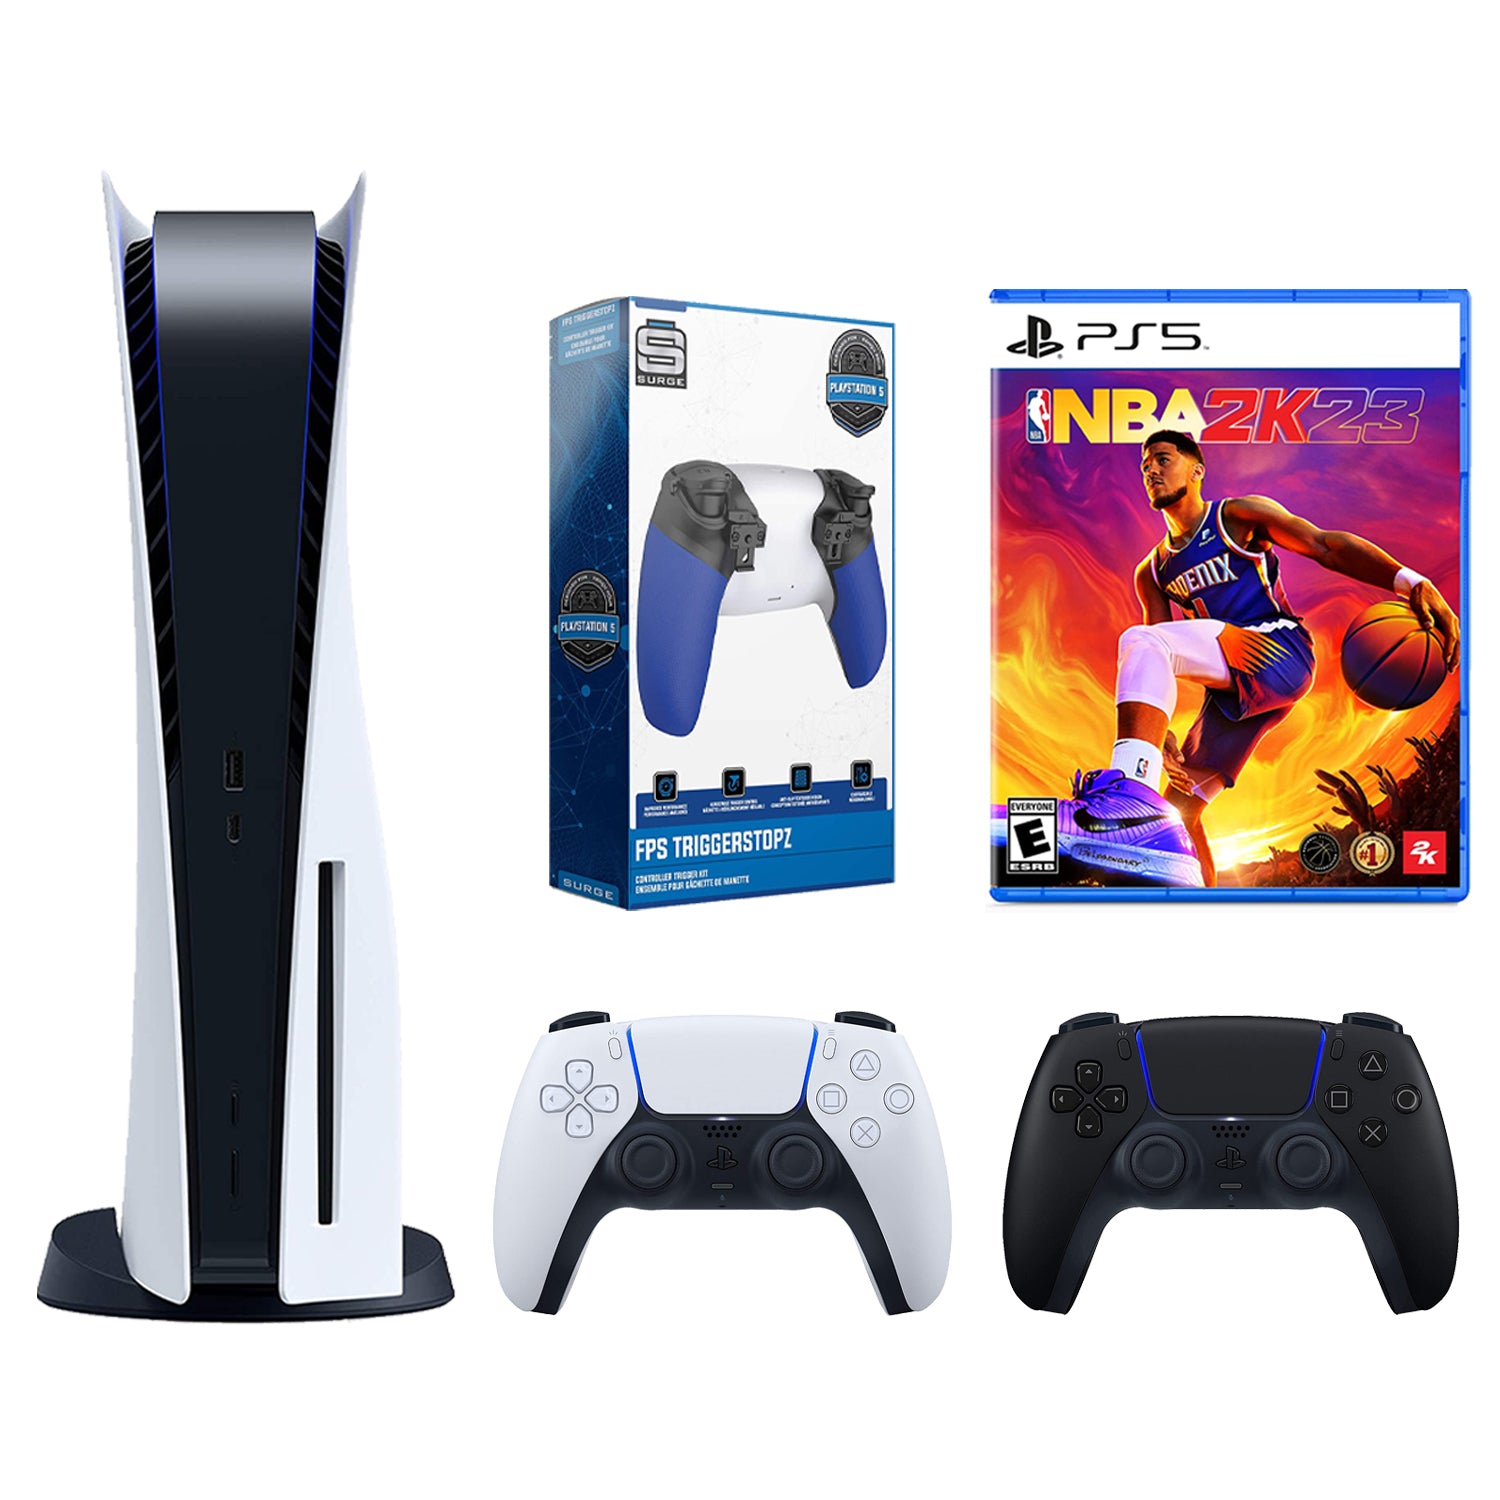 Sony Playstation 5 Disc with NBA 2K23, Extra Controller and Trigger Kit Bundle - Midnight Black - Pro-Distributing